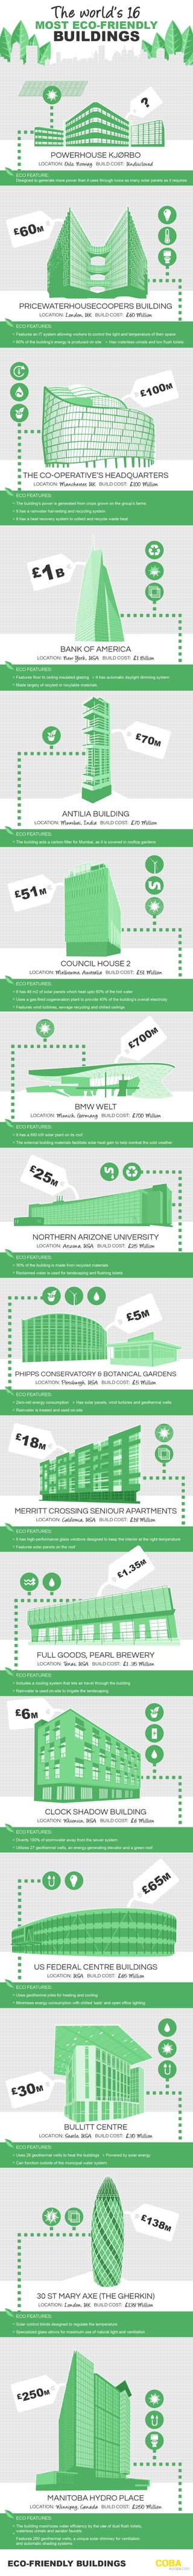 The World's 16 Most Eco-Friendly Buildings